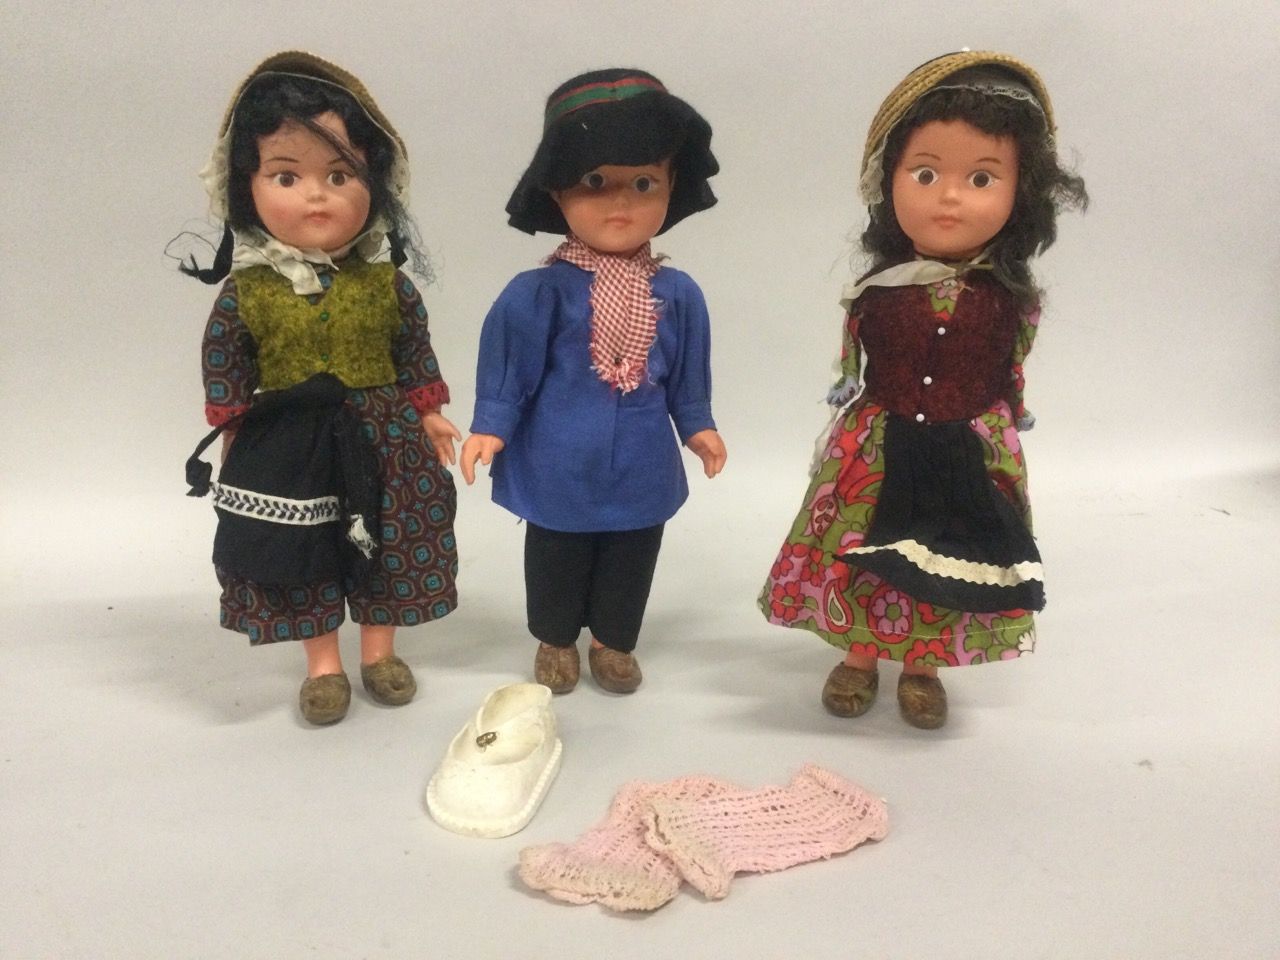 Null Set of 3 plastic dolls in traditional costumes with accessories